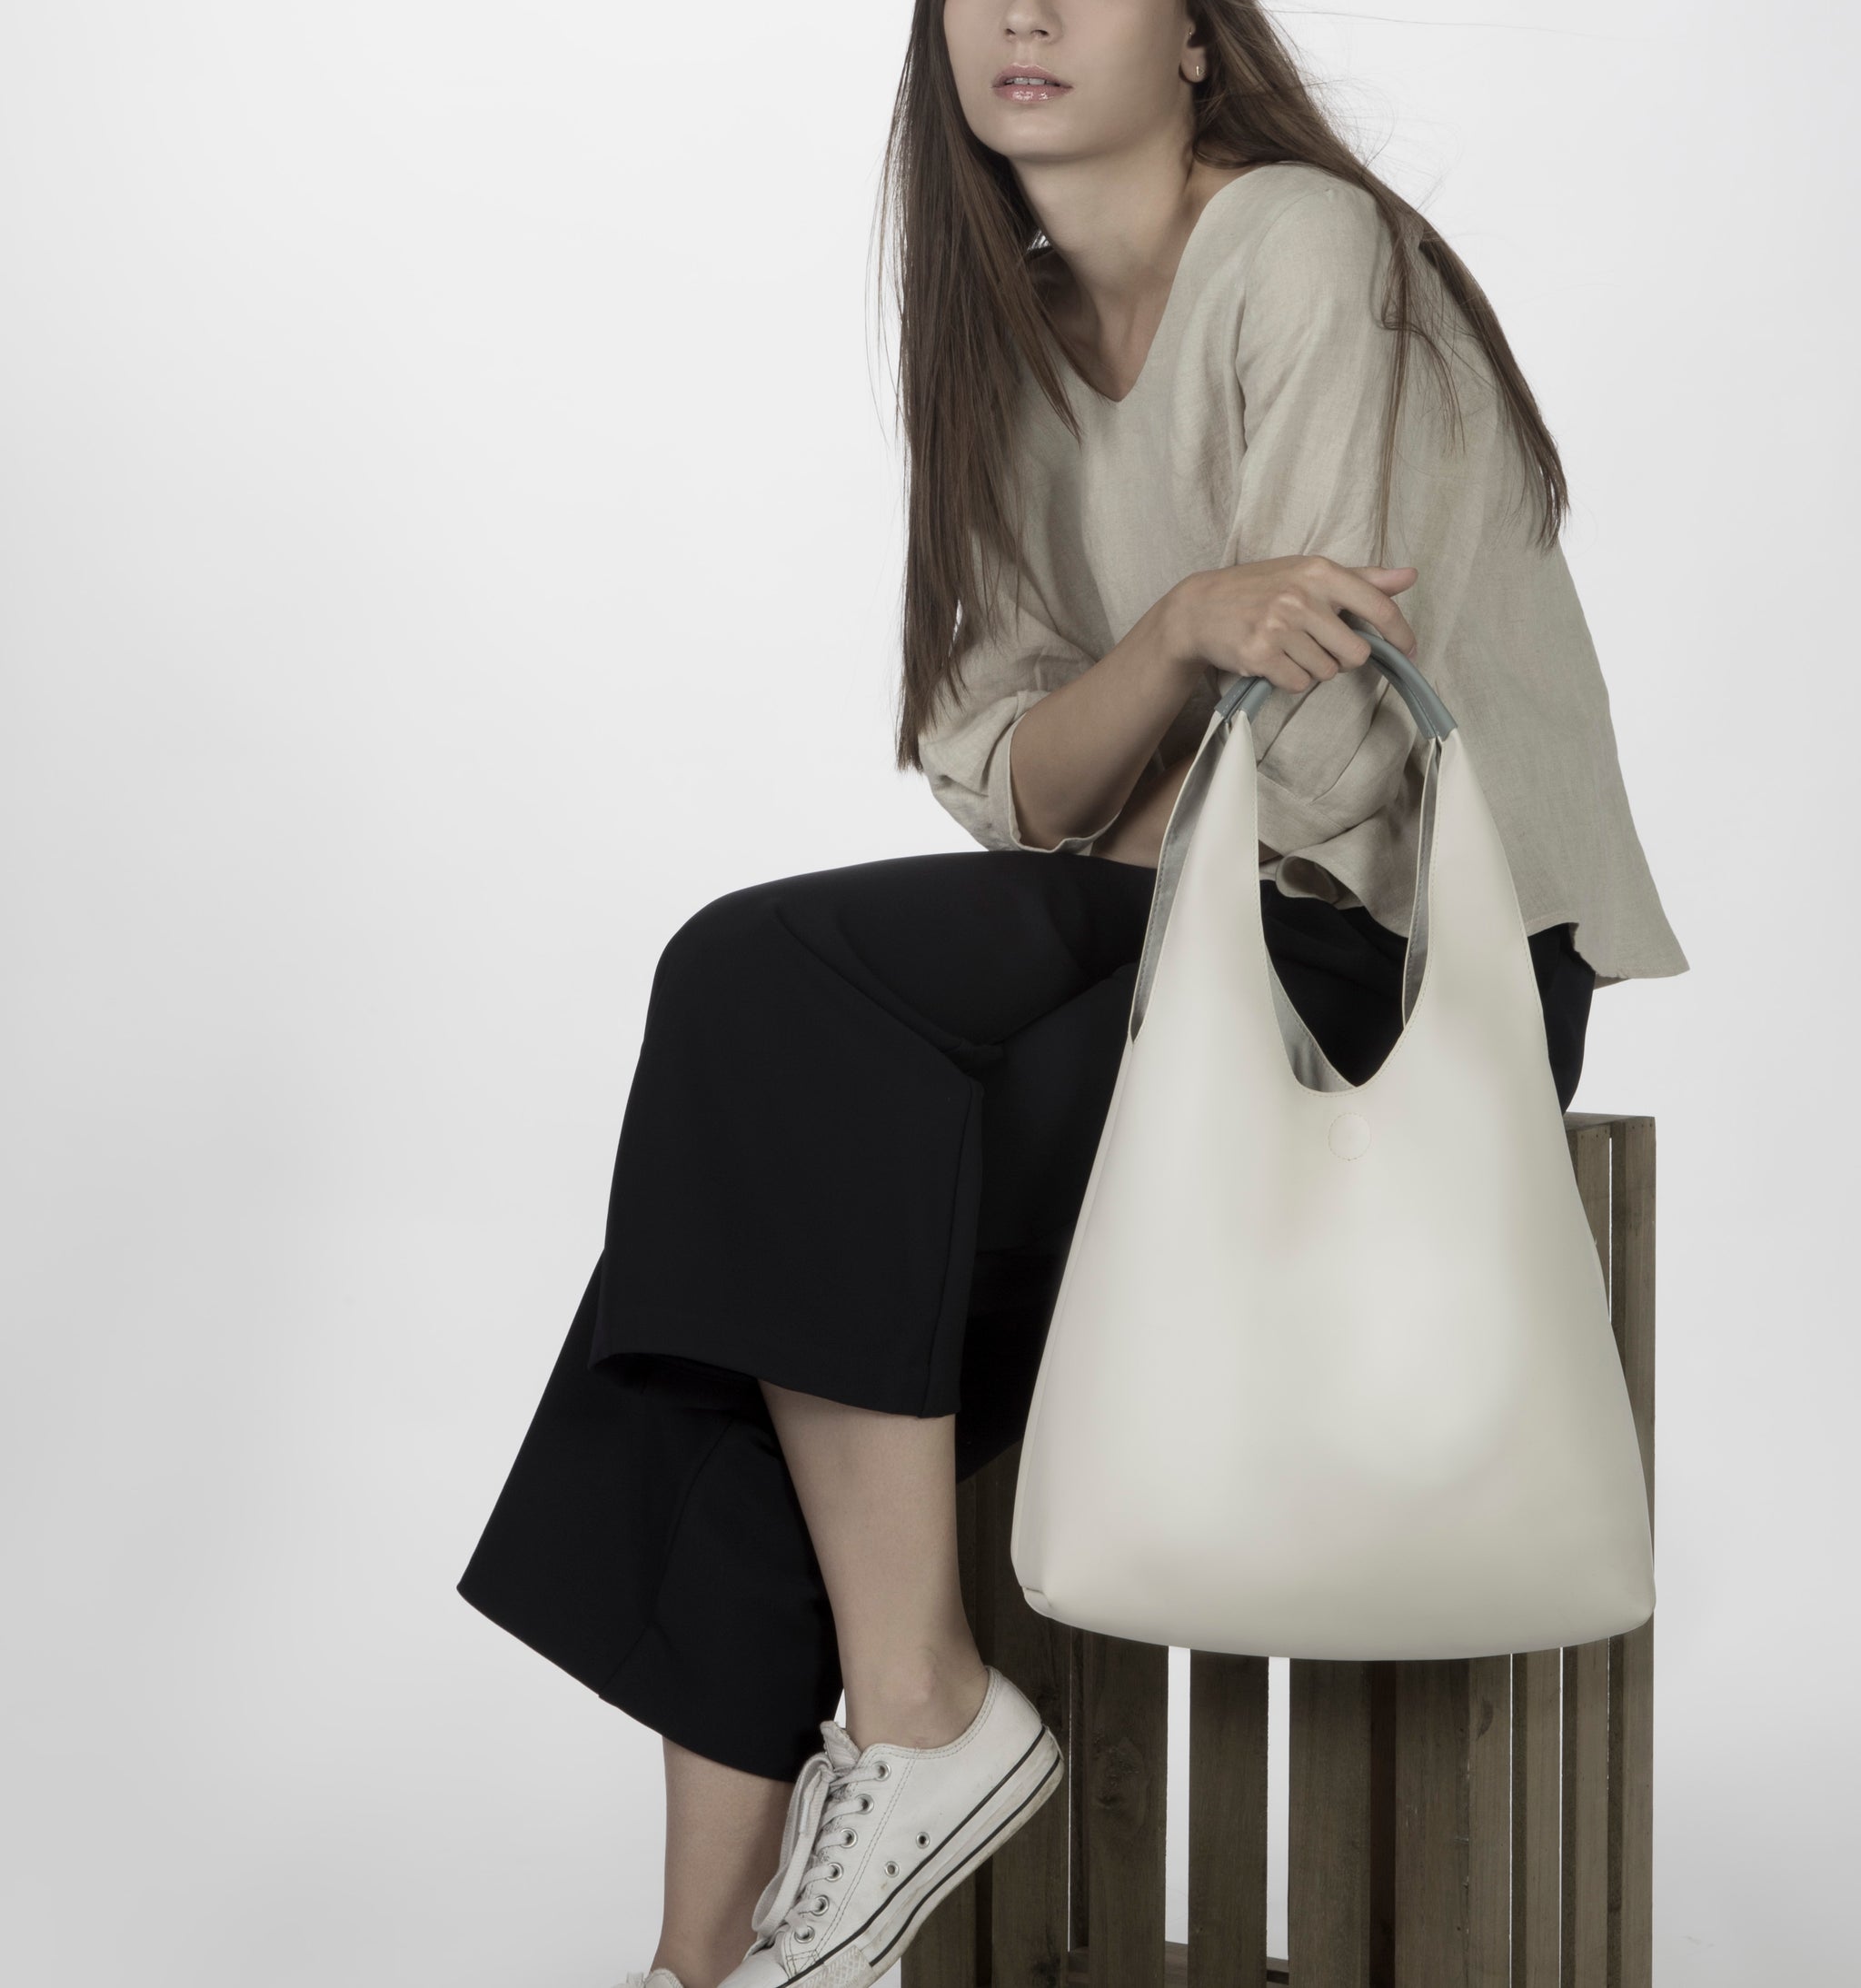 Louis Vuitton - Tote Bags - Muria for WOMEN online on Kate&You